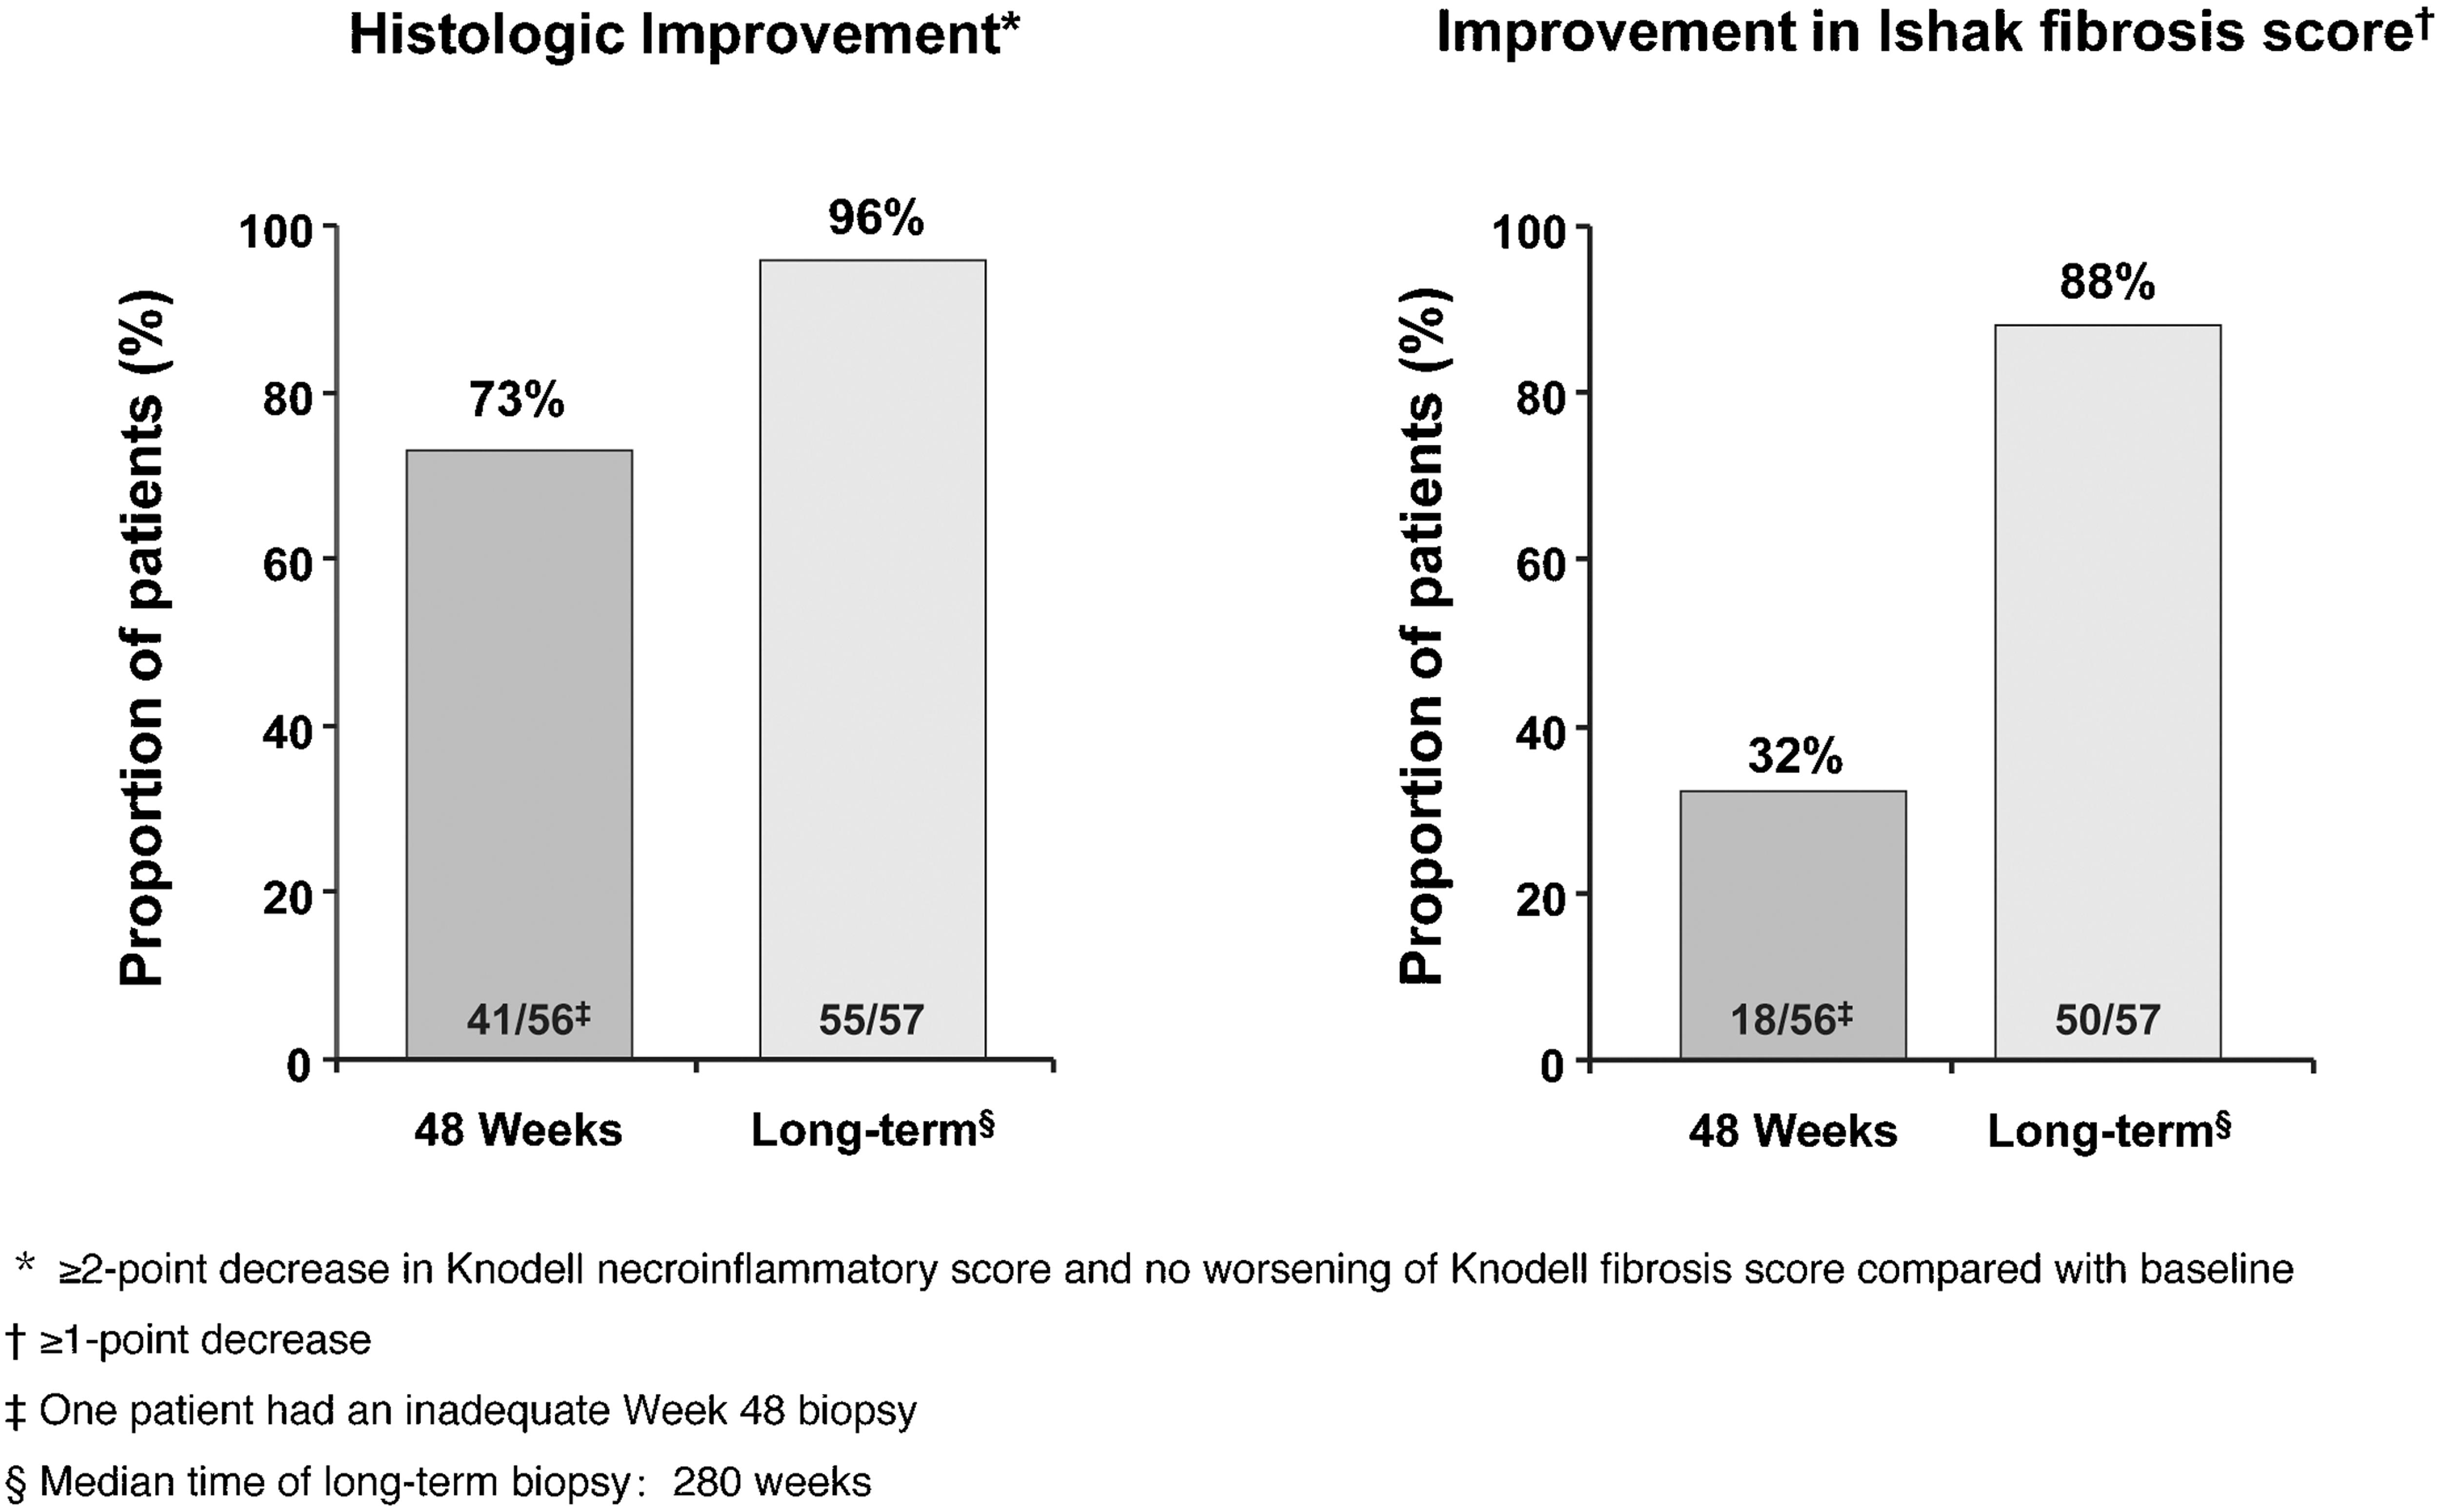 Improvement in histology and in Ishak fibrosis scores with long-term entecavir treatment